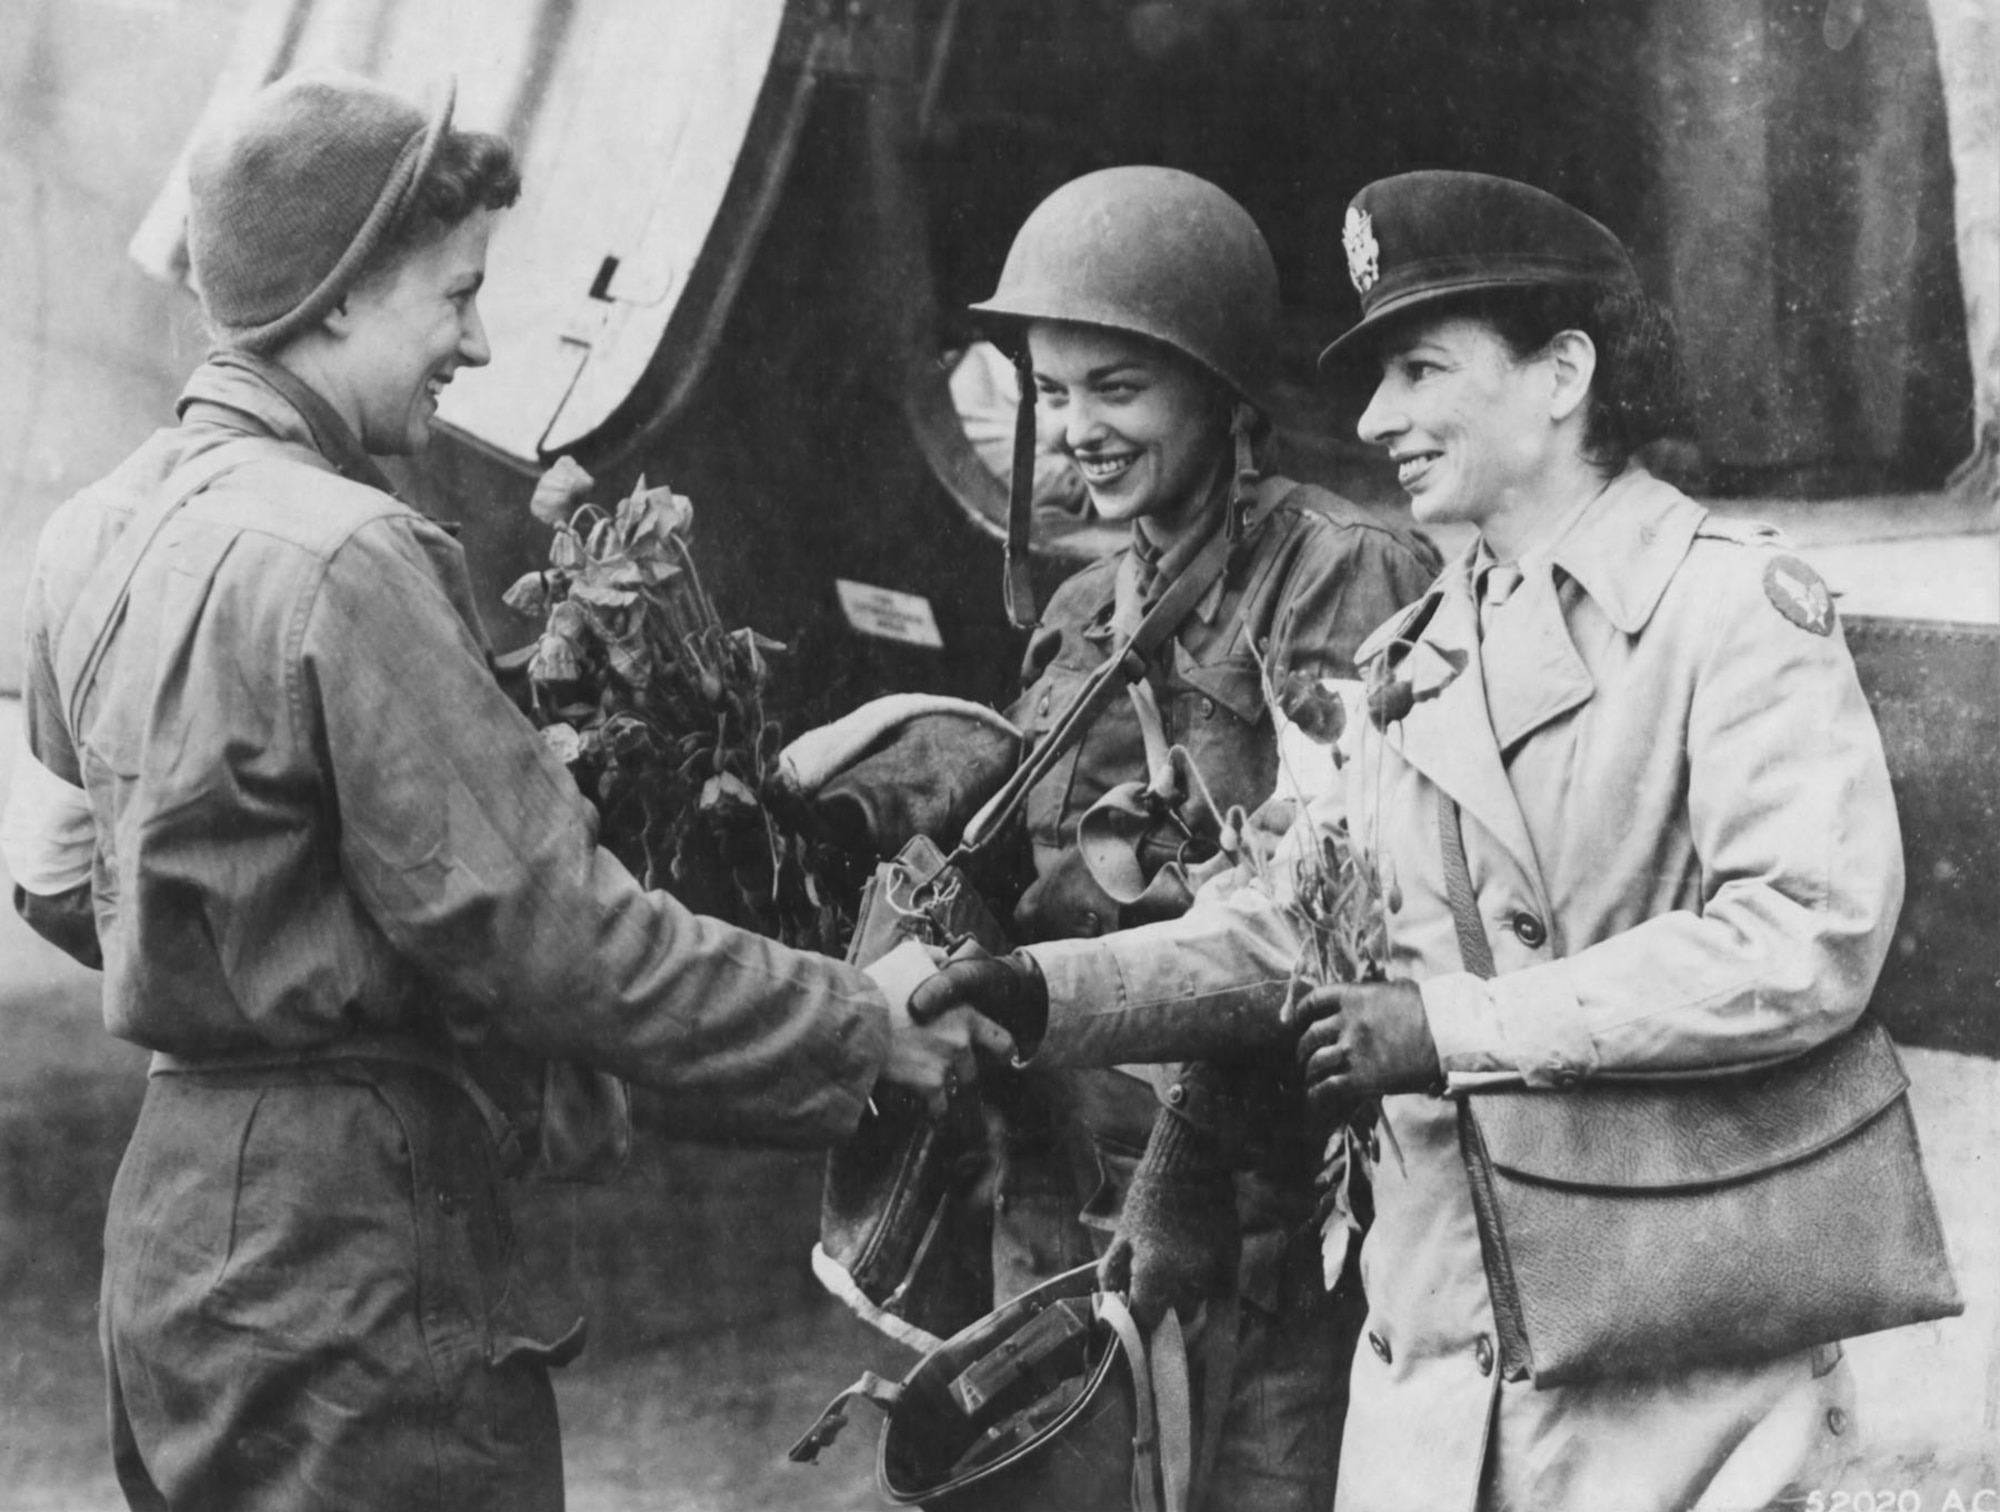 Two of the first flight nurses to make evacuation flights into Normandy after D-Day, Lts. Suella Bernard (left) and Marijean Brown (center) are greeted by Lt. Foster, their head nurse. They are holding poppies they brought back from the Normandy beachhead. (U.S. Air Force photo)